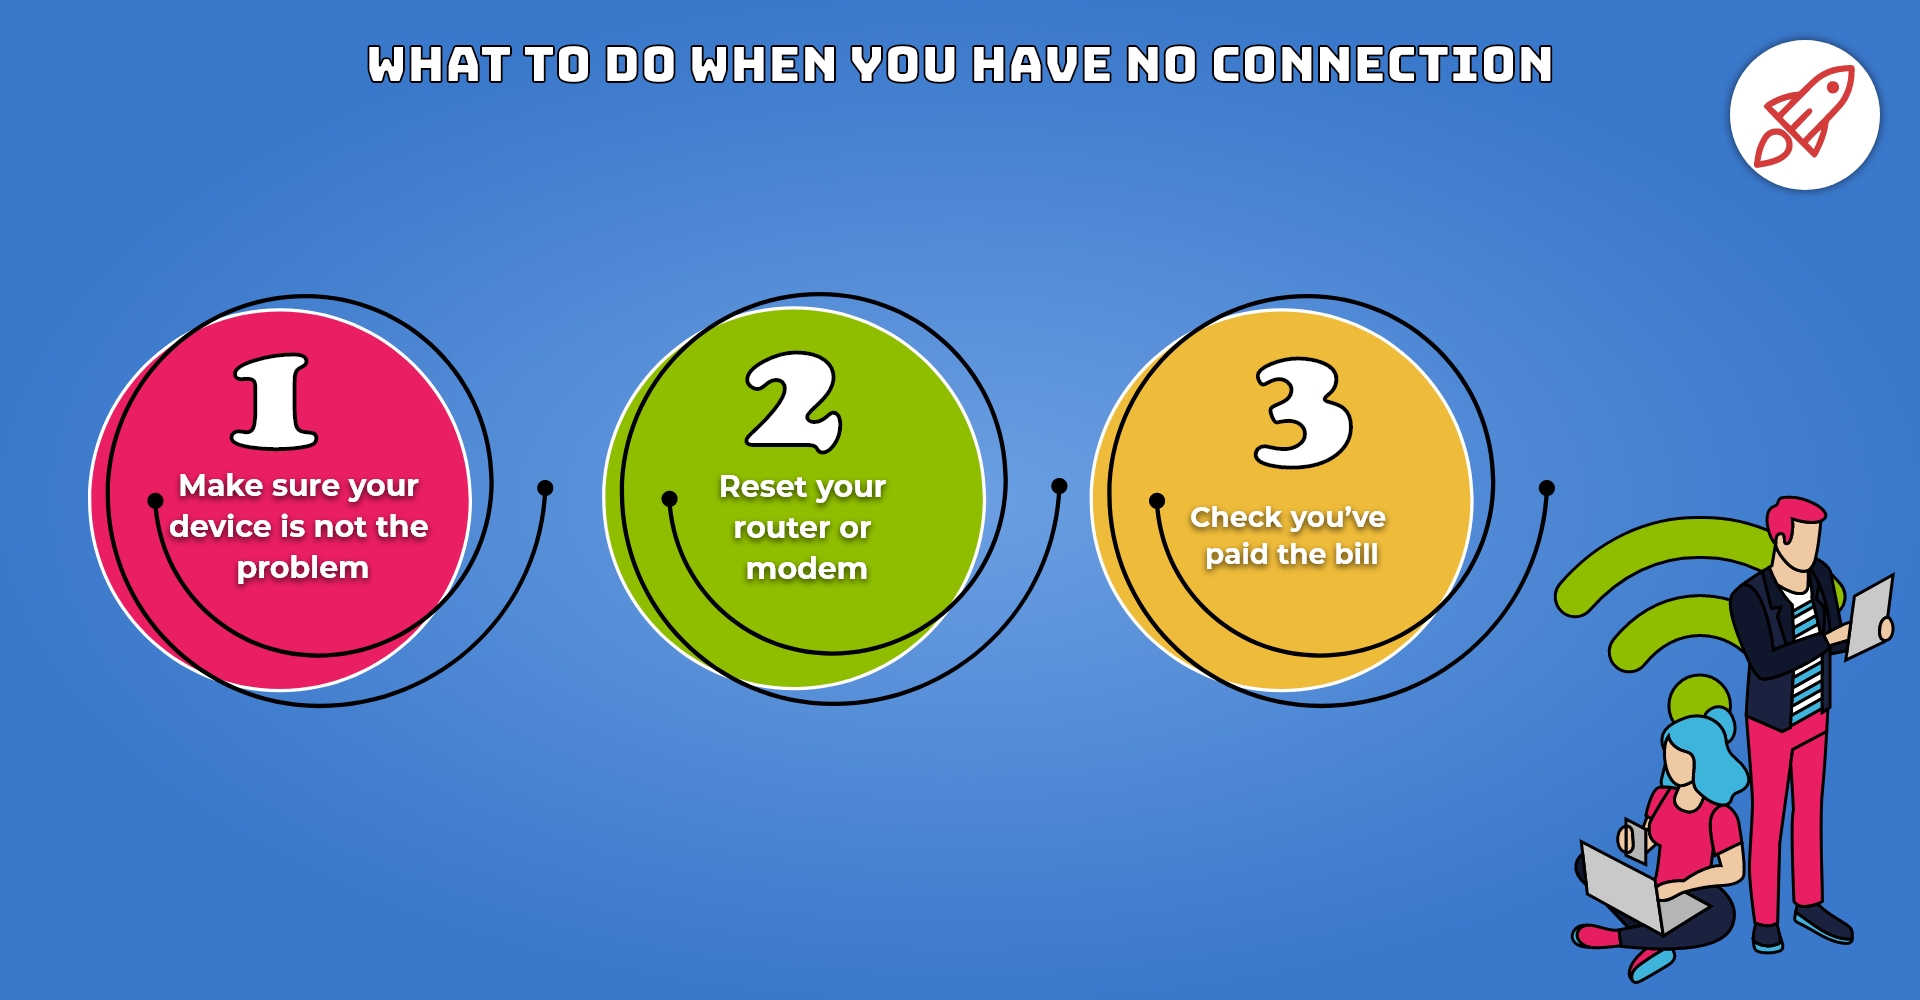 What to do when you have no connection